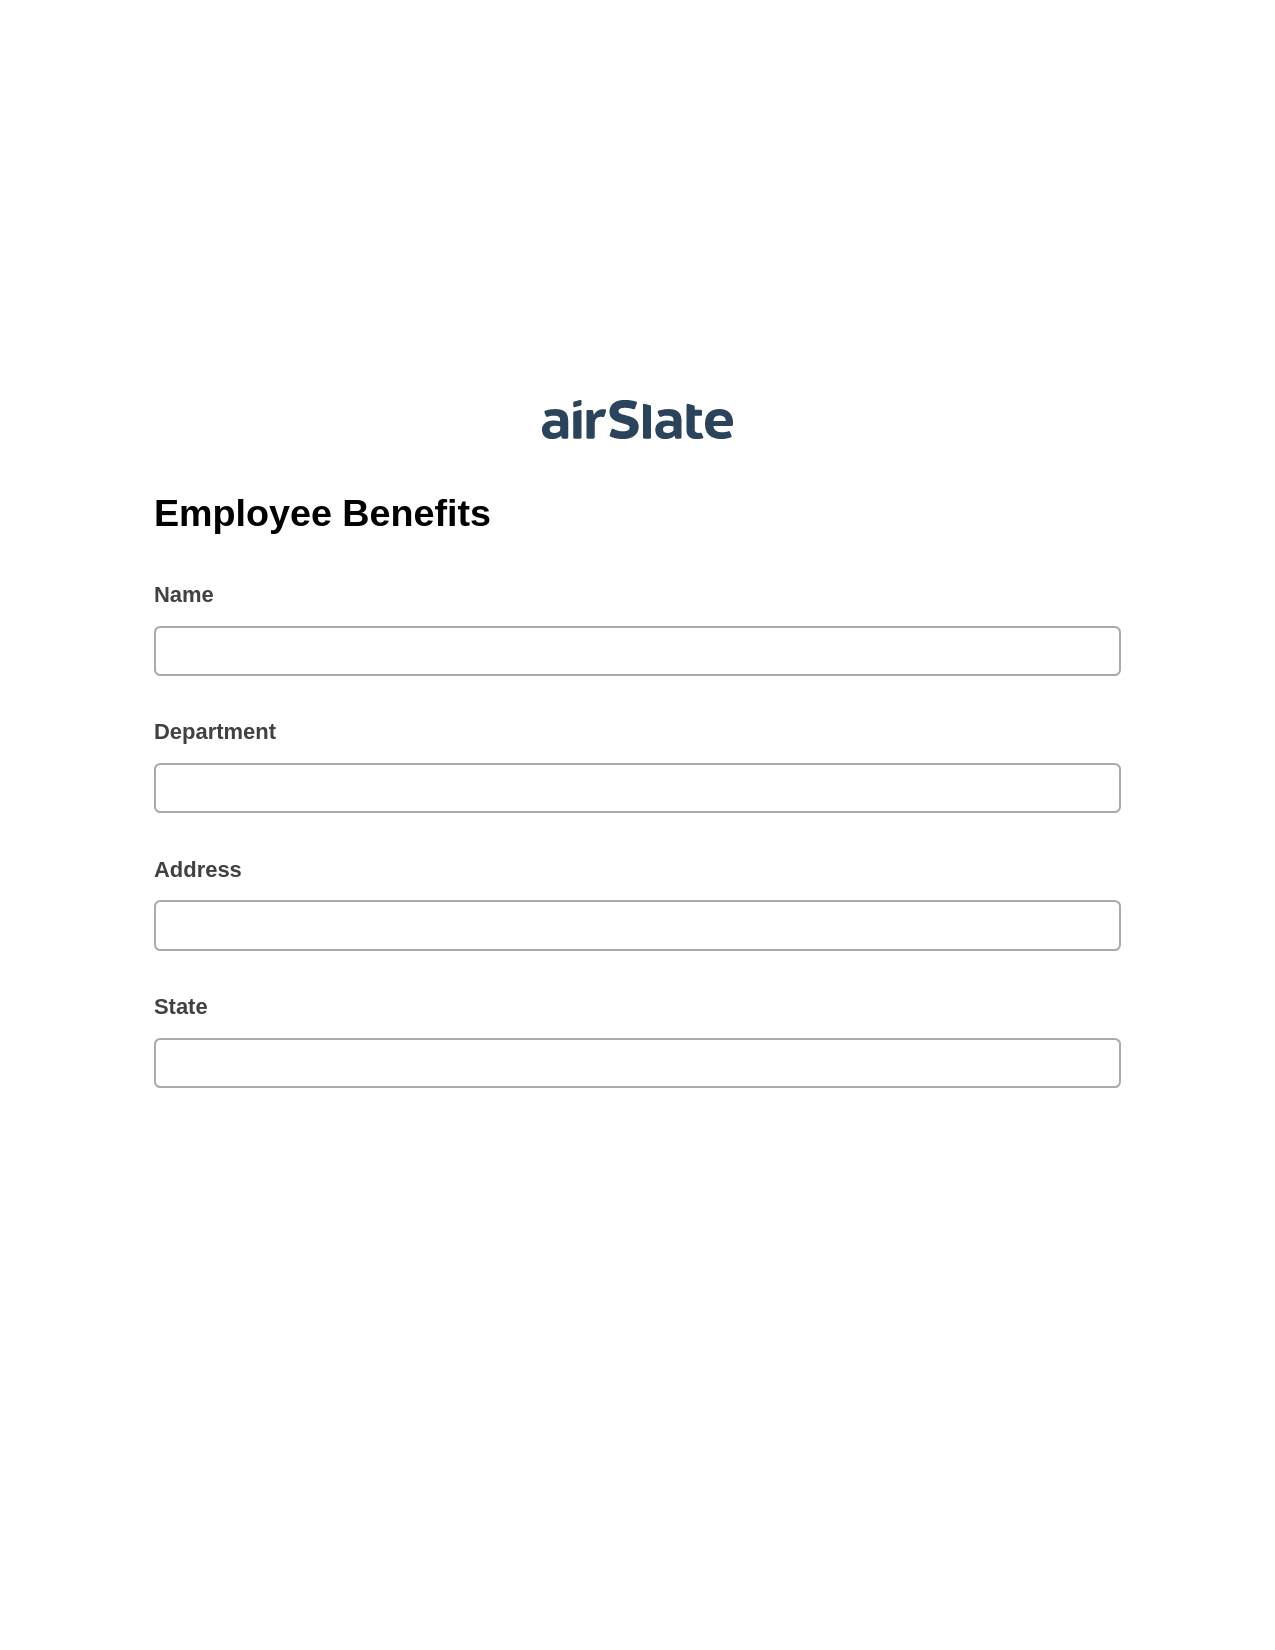 Employee Benefits Pre-fill from Salesforce Records with SOQL Bot, Pre-fill with Custom Data Bot, Export to Google Sheet Bot